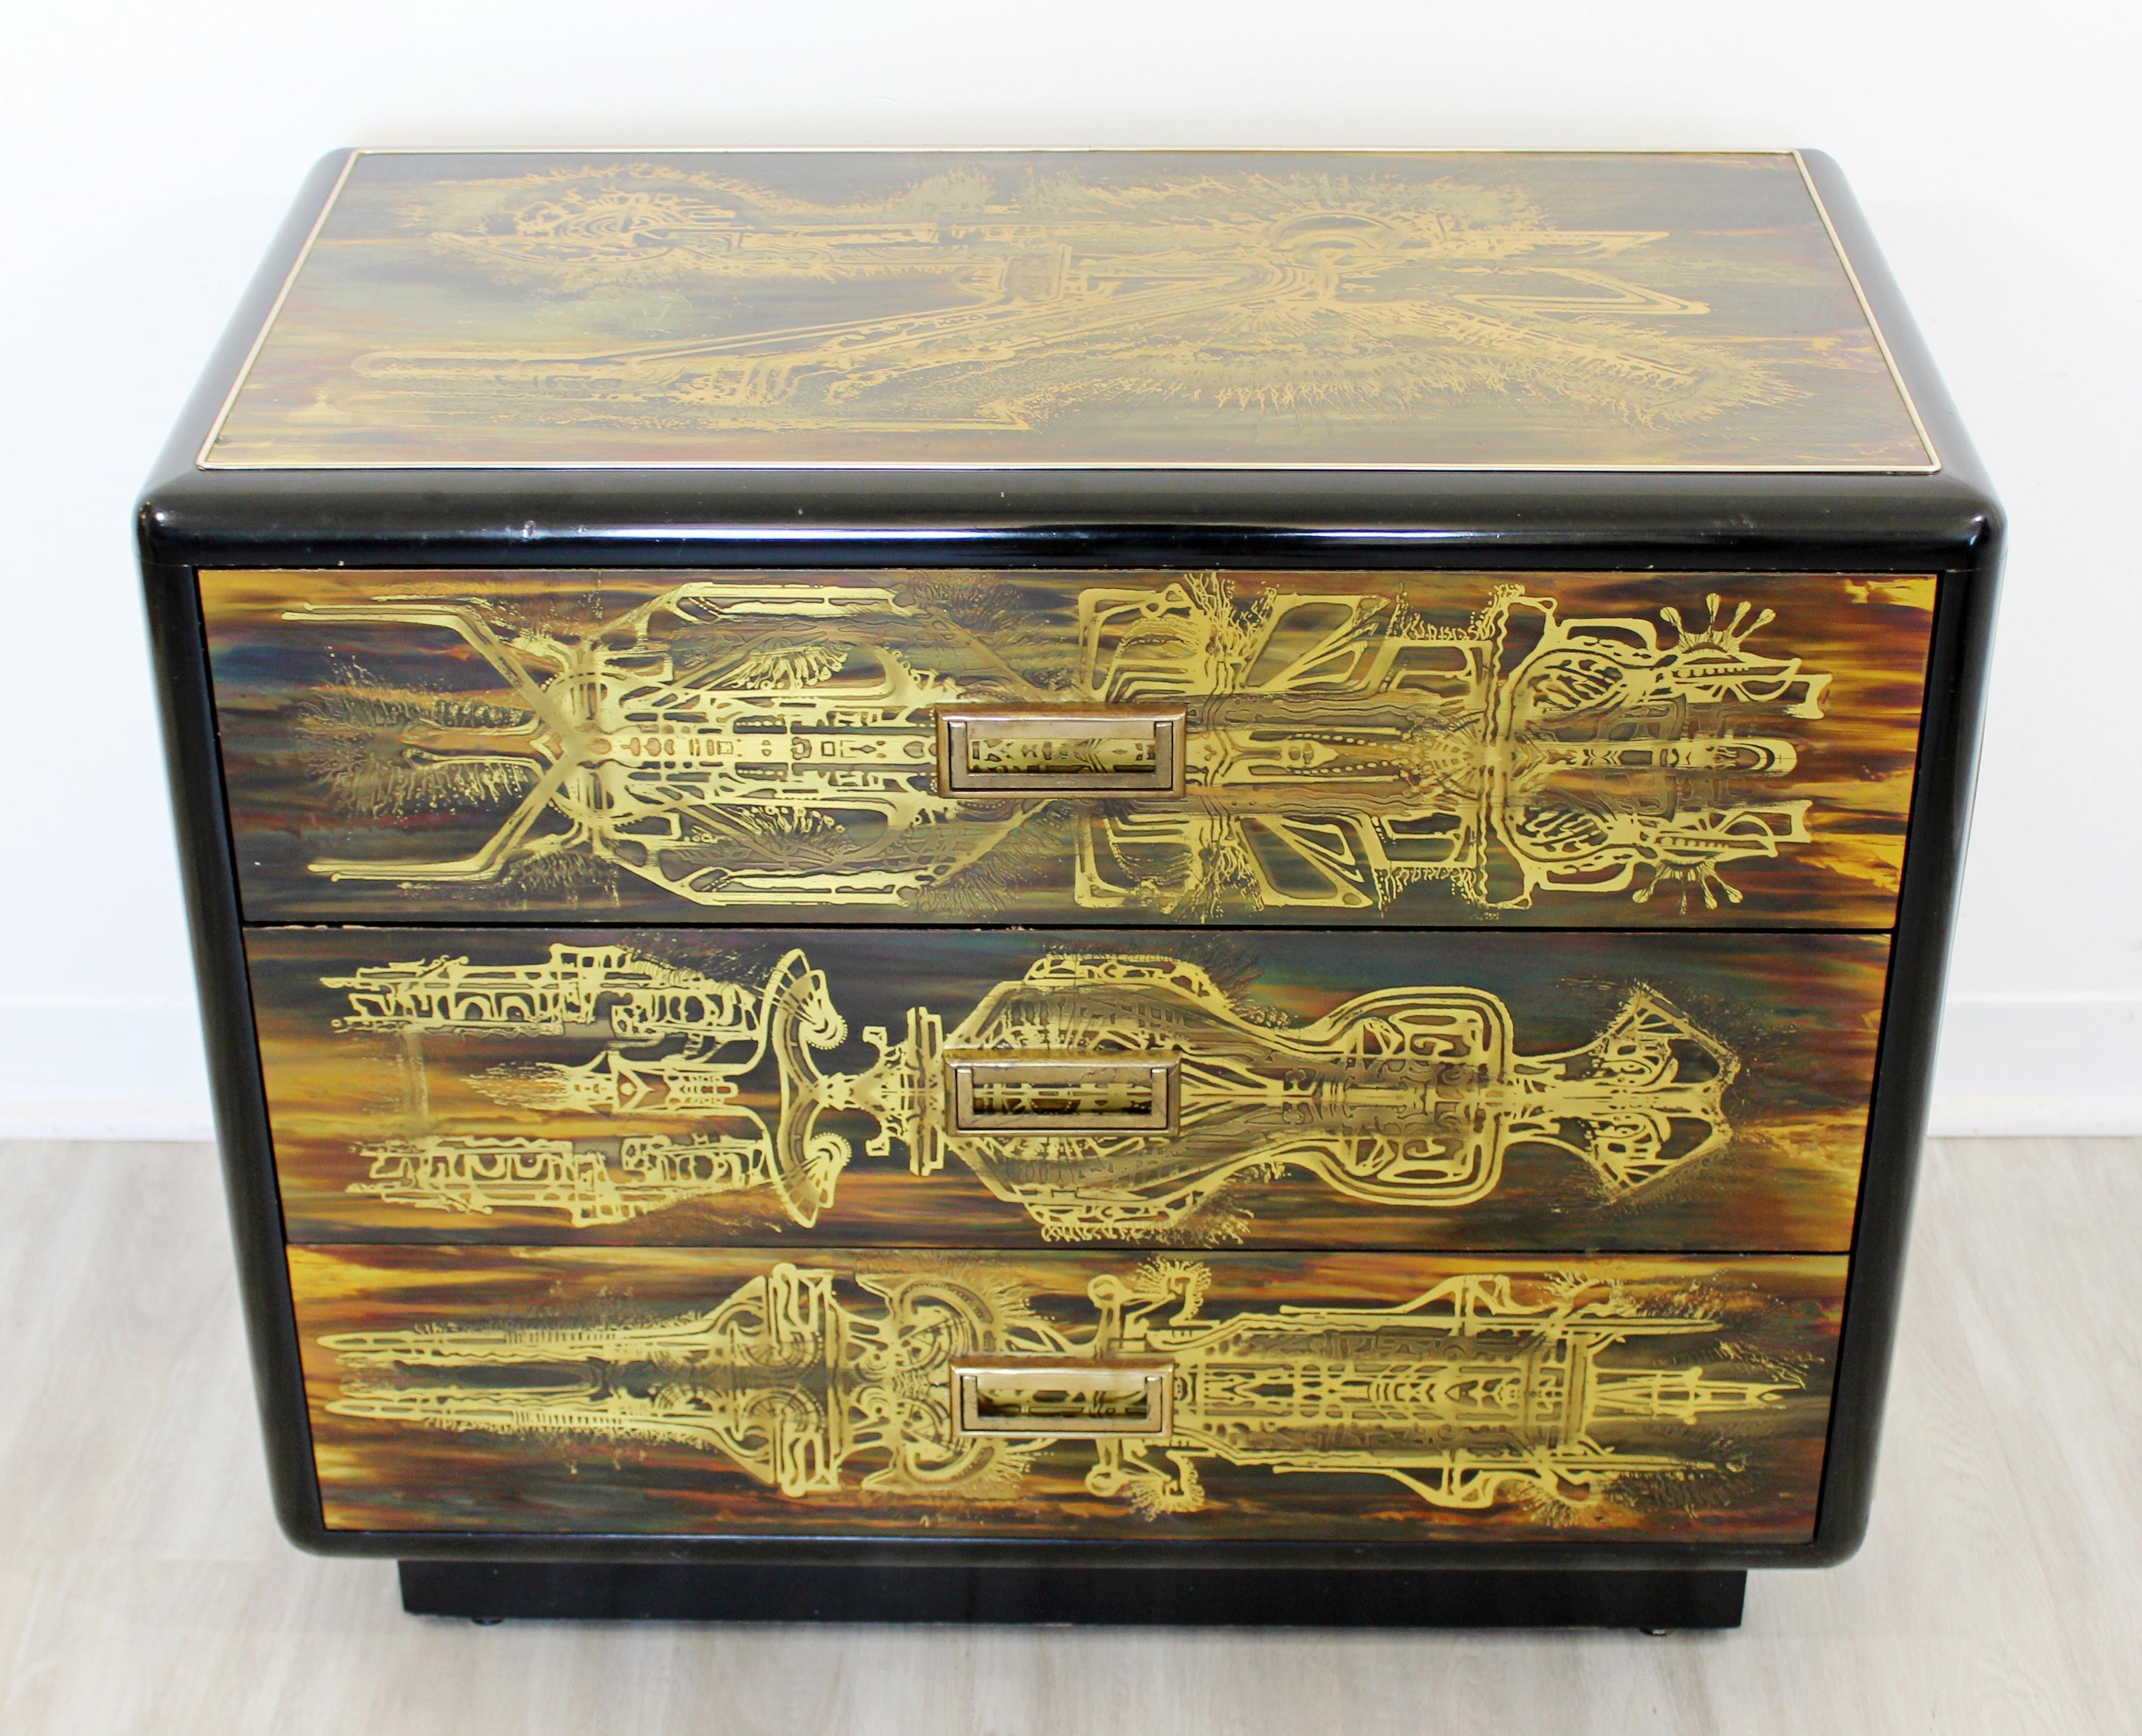 For your consideration is a phenomenal, acid etched chest or cabinet of black lacquer drawers, with a chinoiserie design, by Bernard Rohne for Mastercraft, circa the early 1970s. In excellent vintage condition. The dimensions are 31